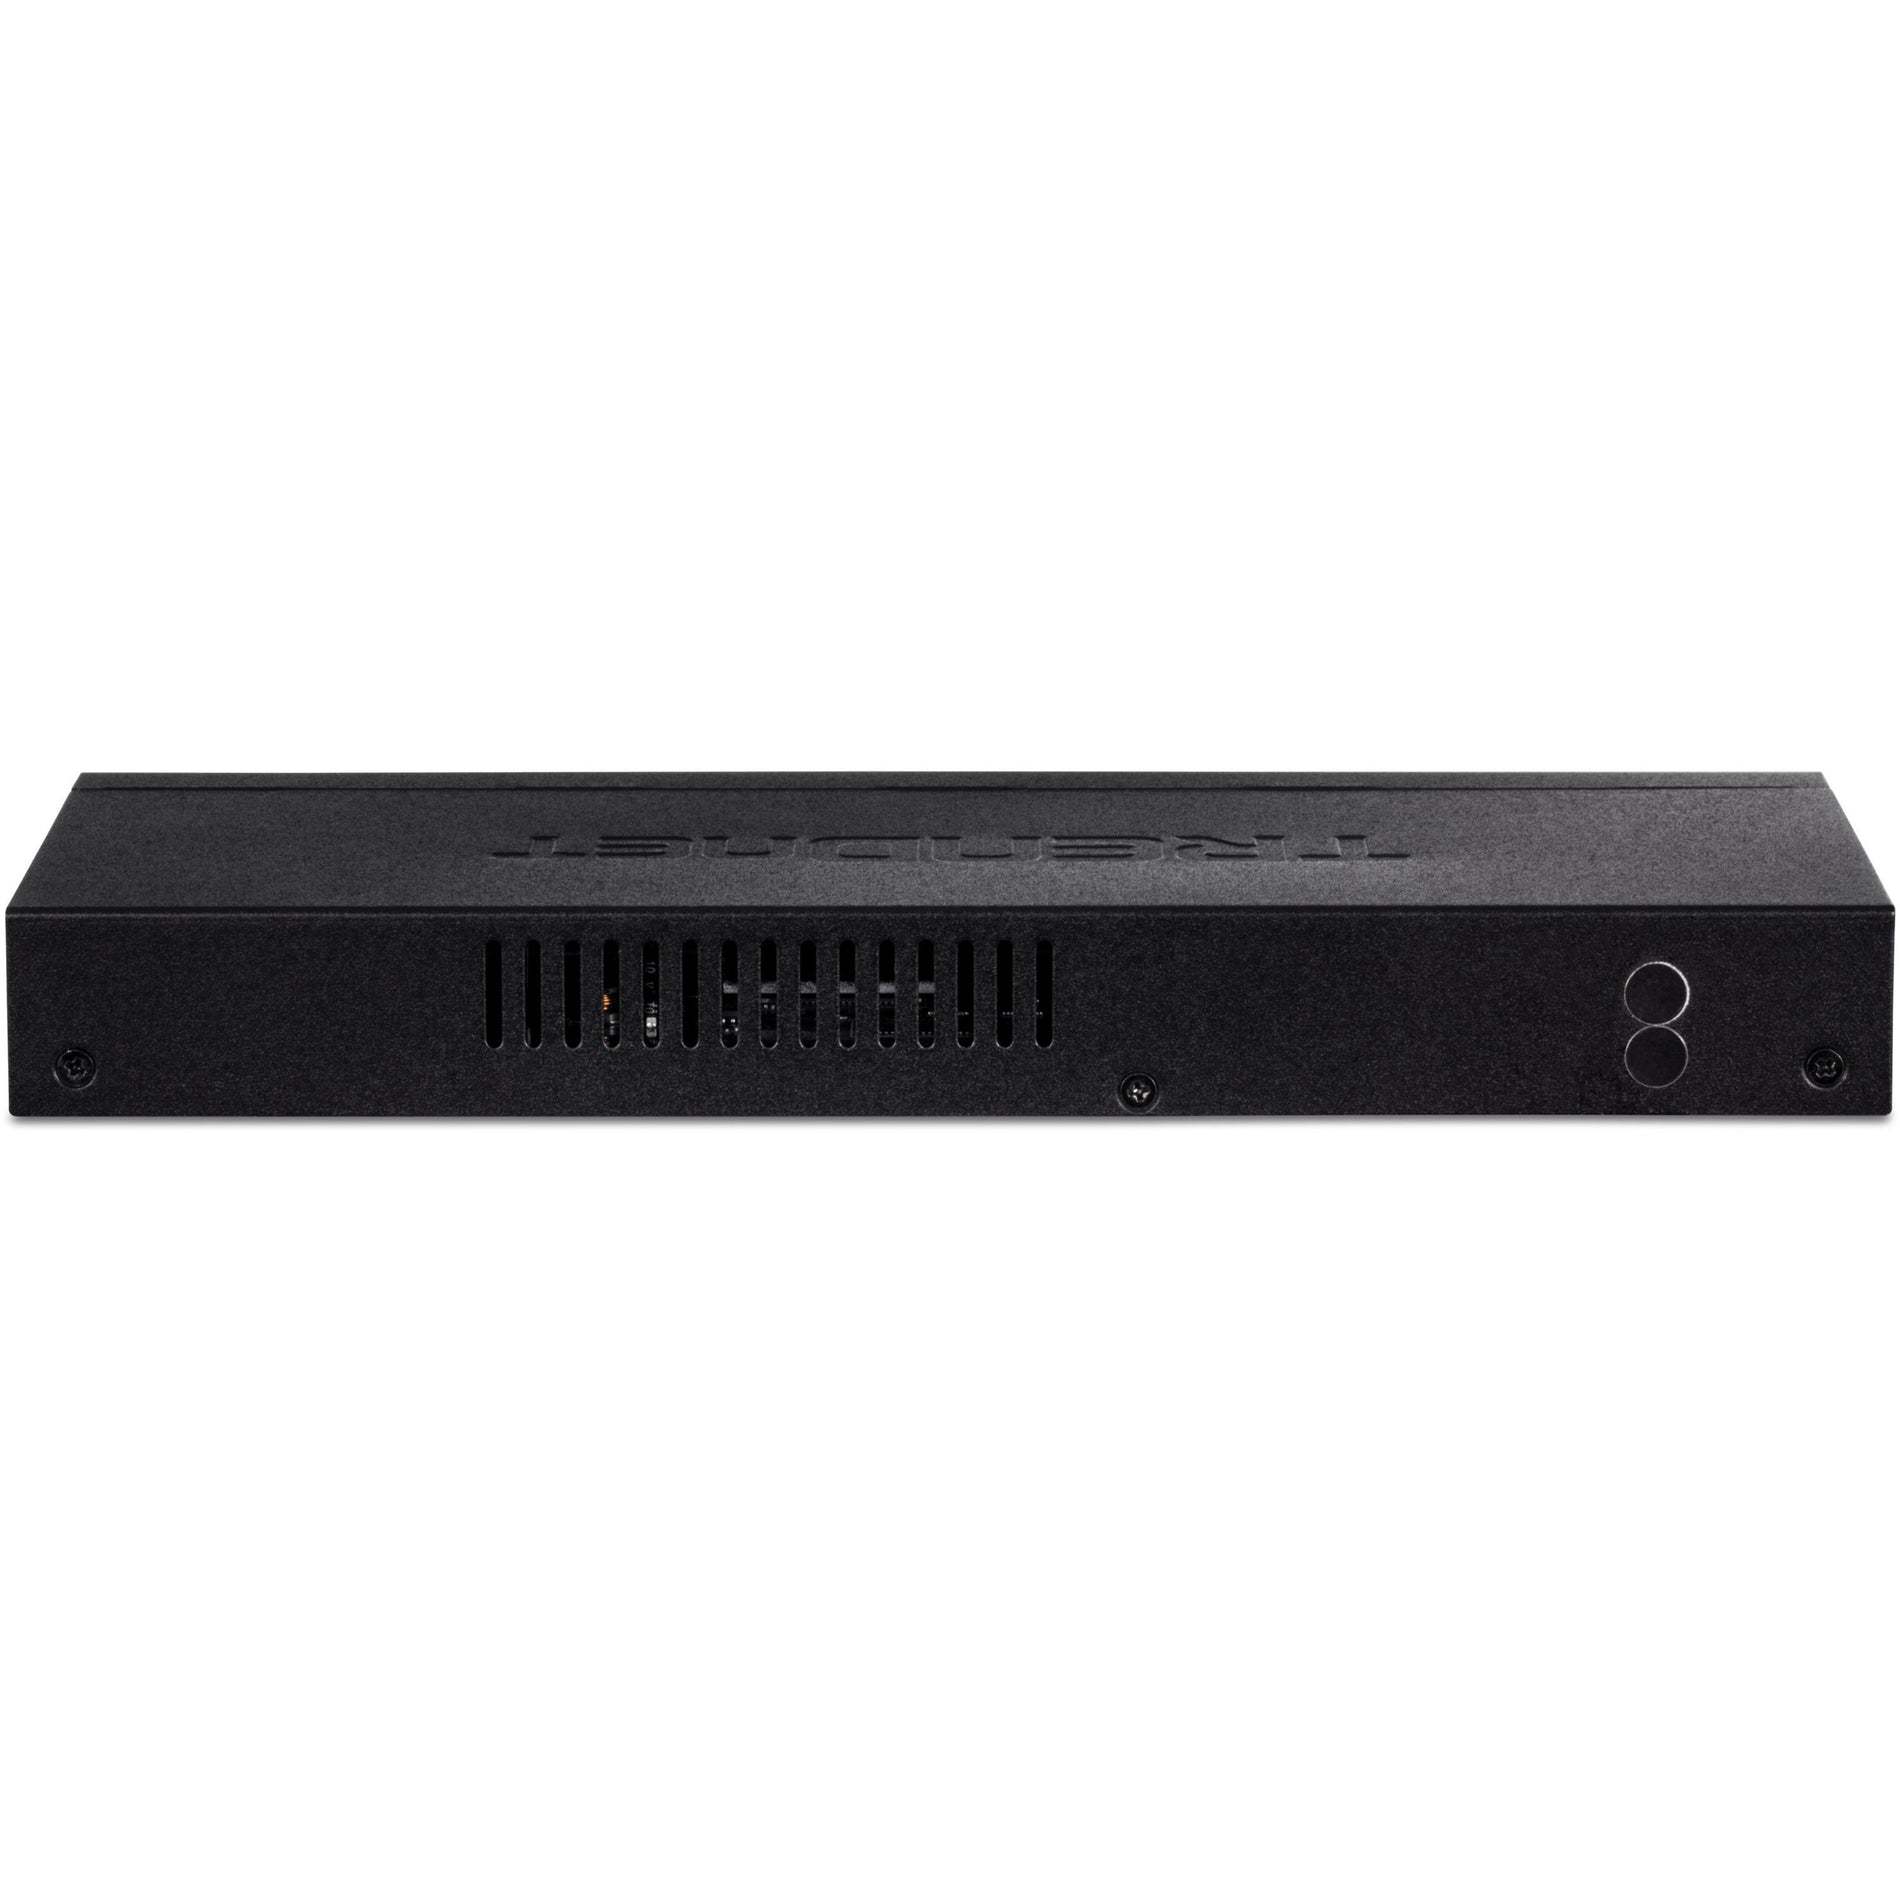 TRENDnet TEG-S380 8-Port Unmanaged 2.5G Switch, 8 x 2.5GBASE-T Ports, 40Gbps Switching Capacity, Backwards Compatible with 10-100-1000Mbps Devices